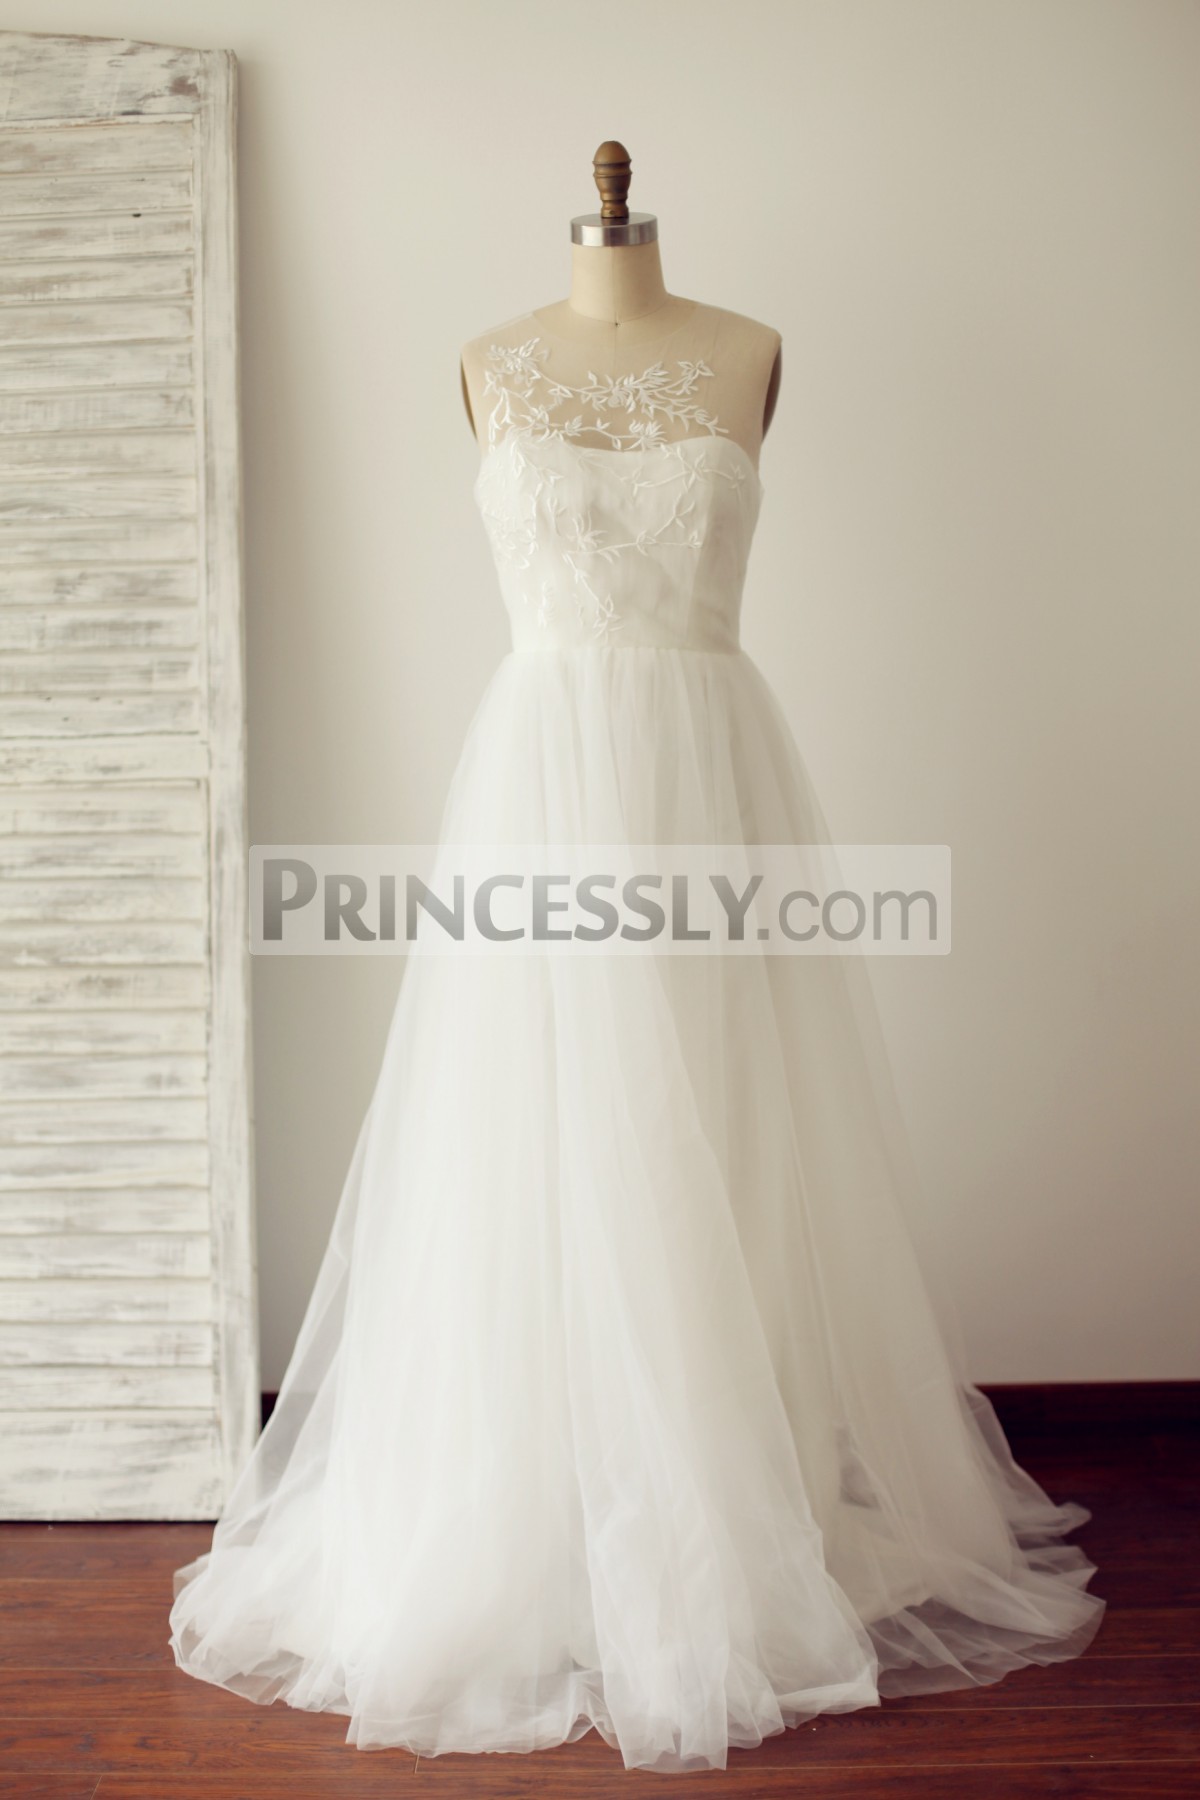 Princessly.com-K1003280-A Line Sheer Illusion Lace Tulle Wedding Dress with Sweep Train-31